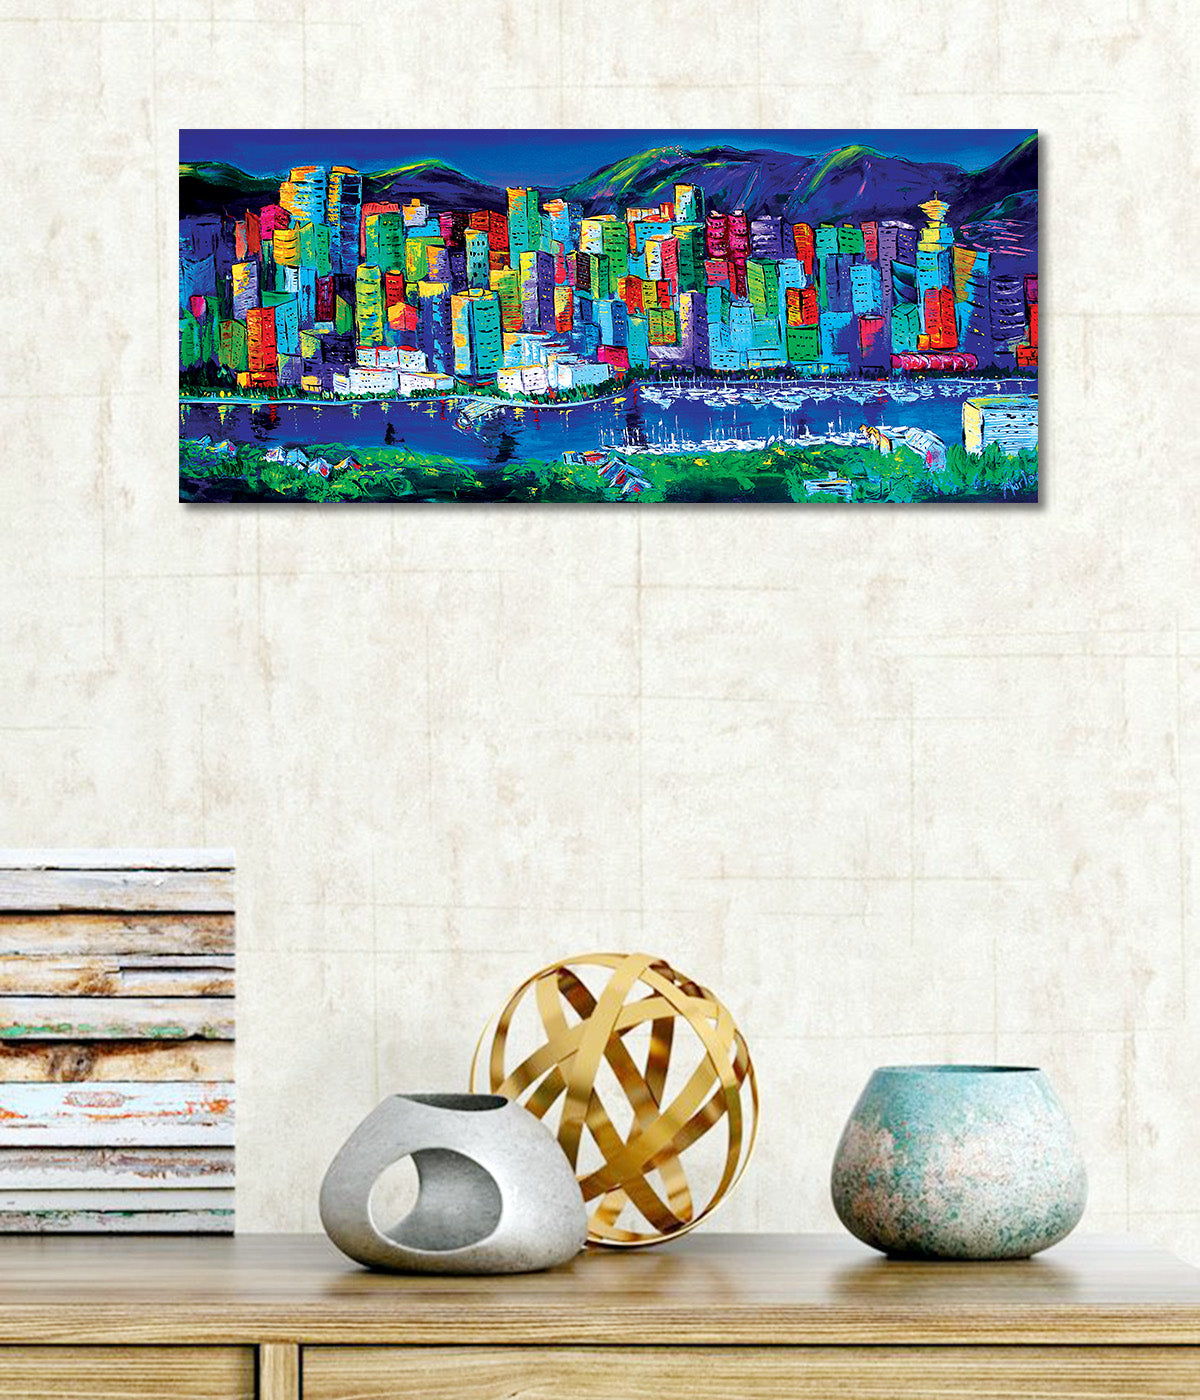 Big City Life - Unframed Canvas Painting